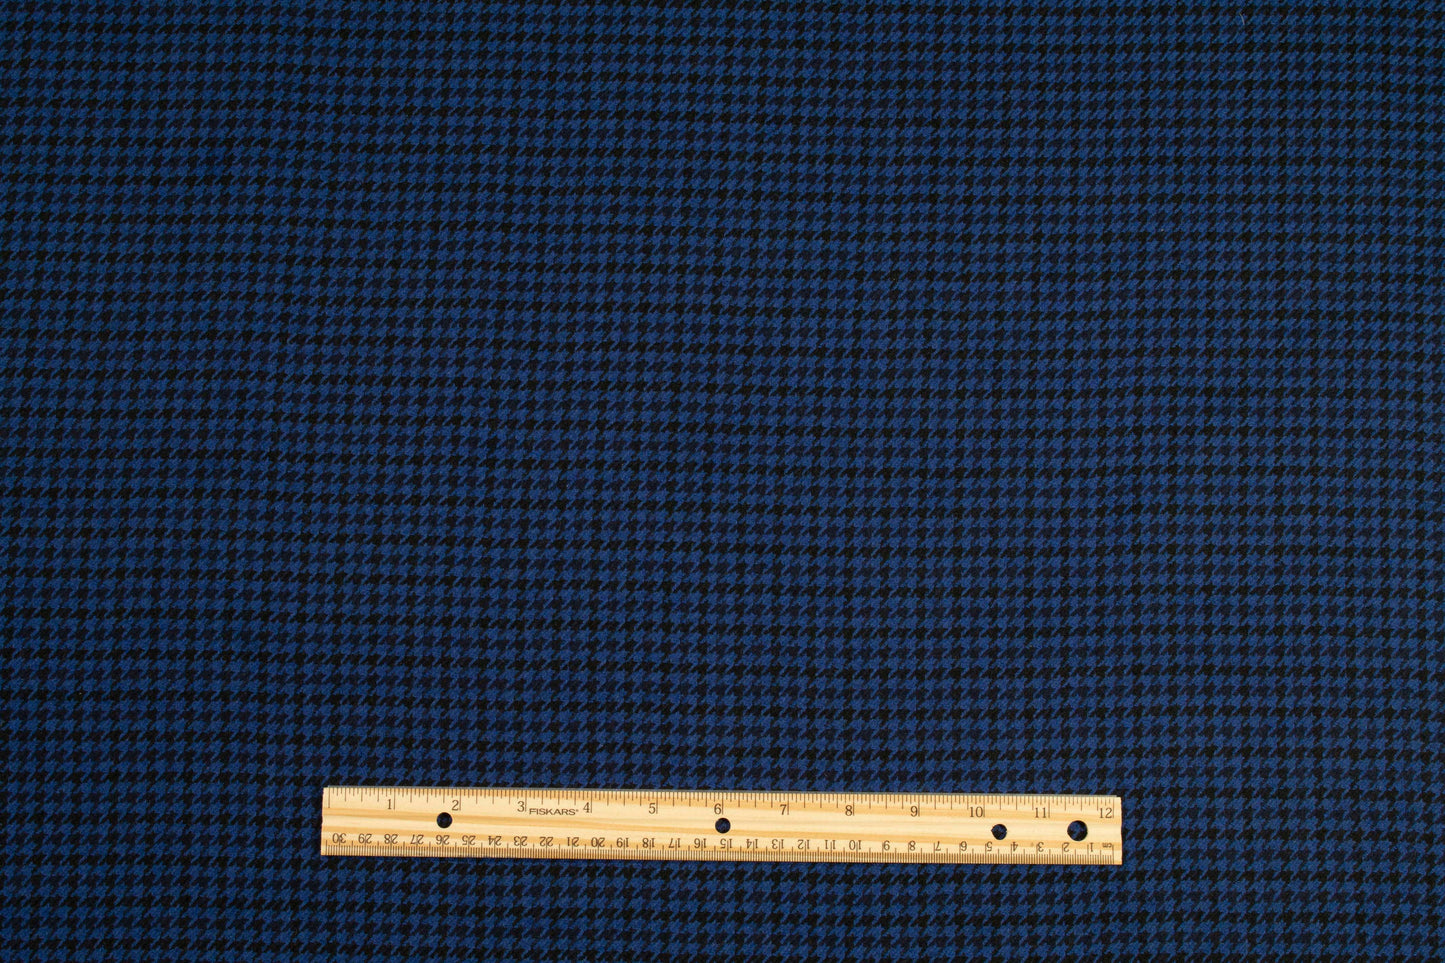 Blue and Black Houndstooth Italian Wool Suiting - Prime Fabrics